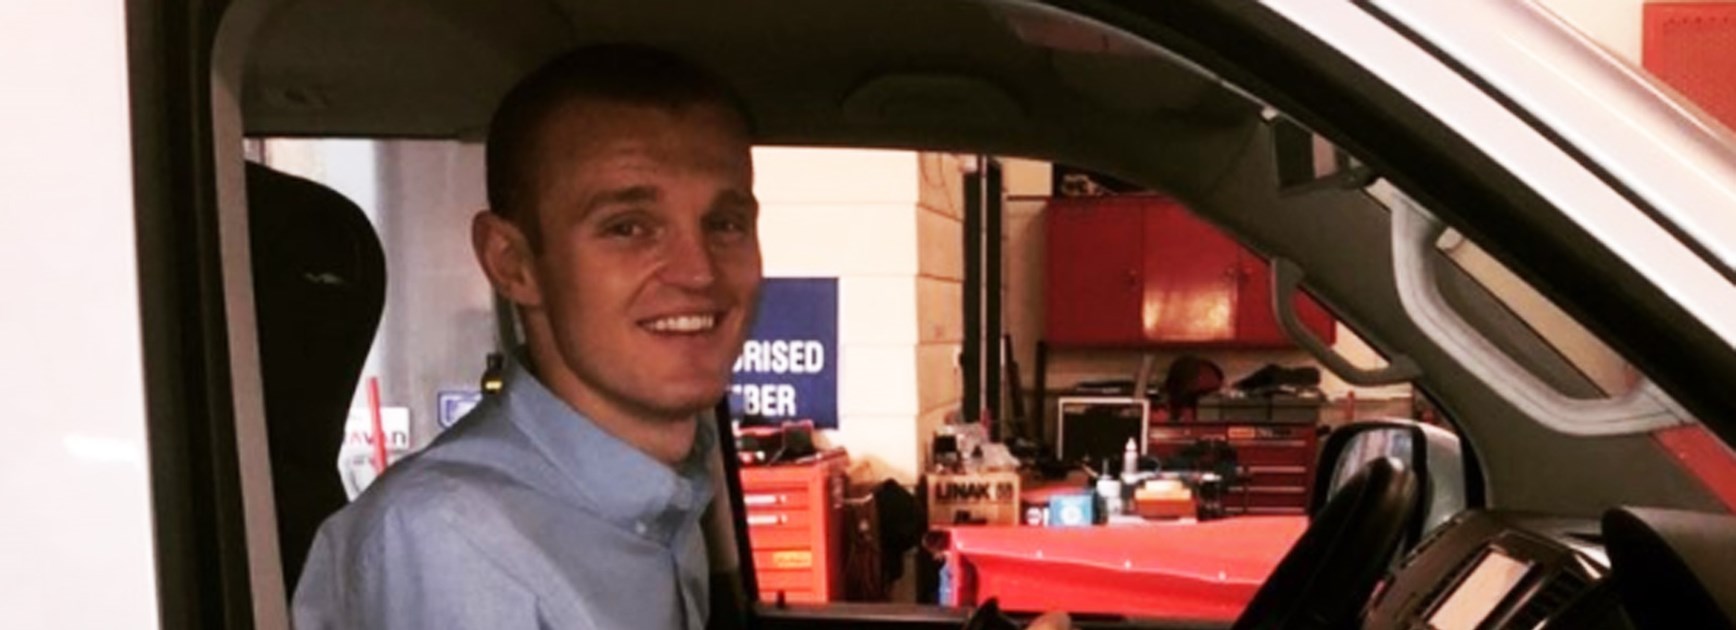 Alex McKinnon has announced he's set to get back behind the wheel.